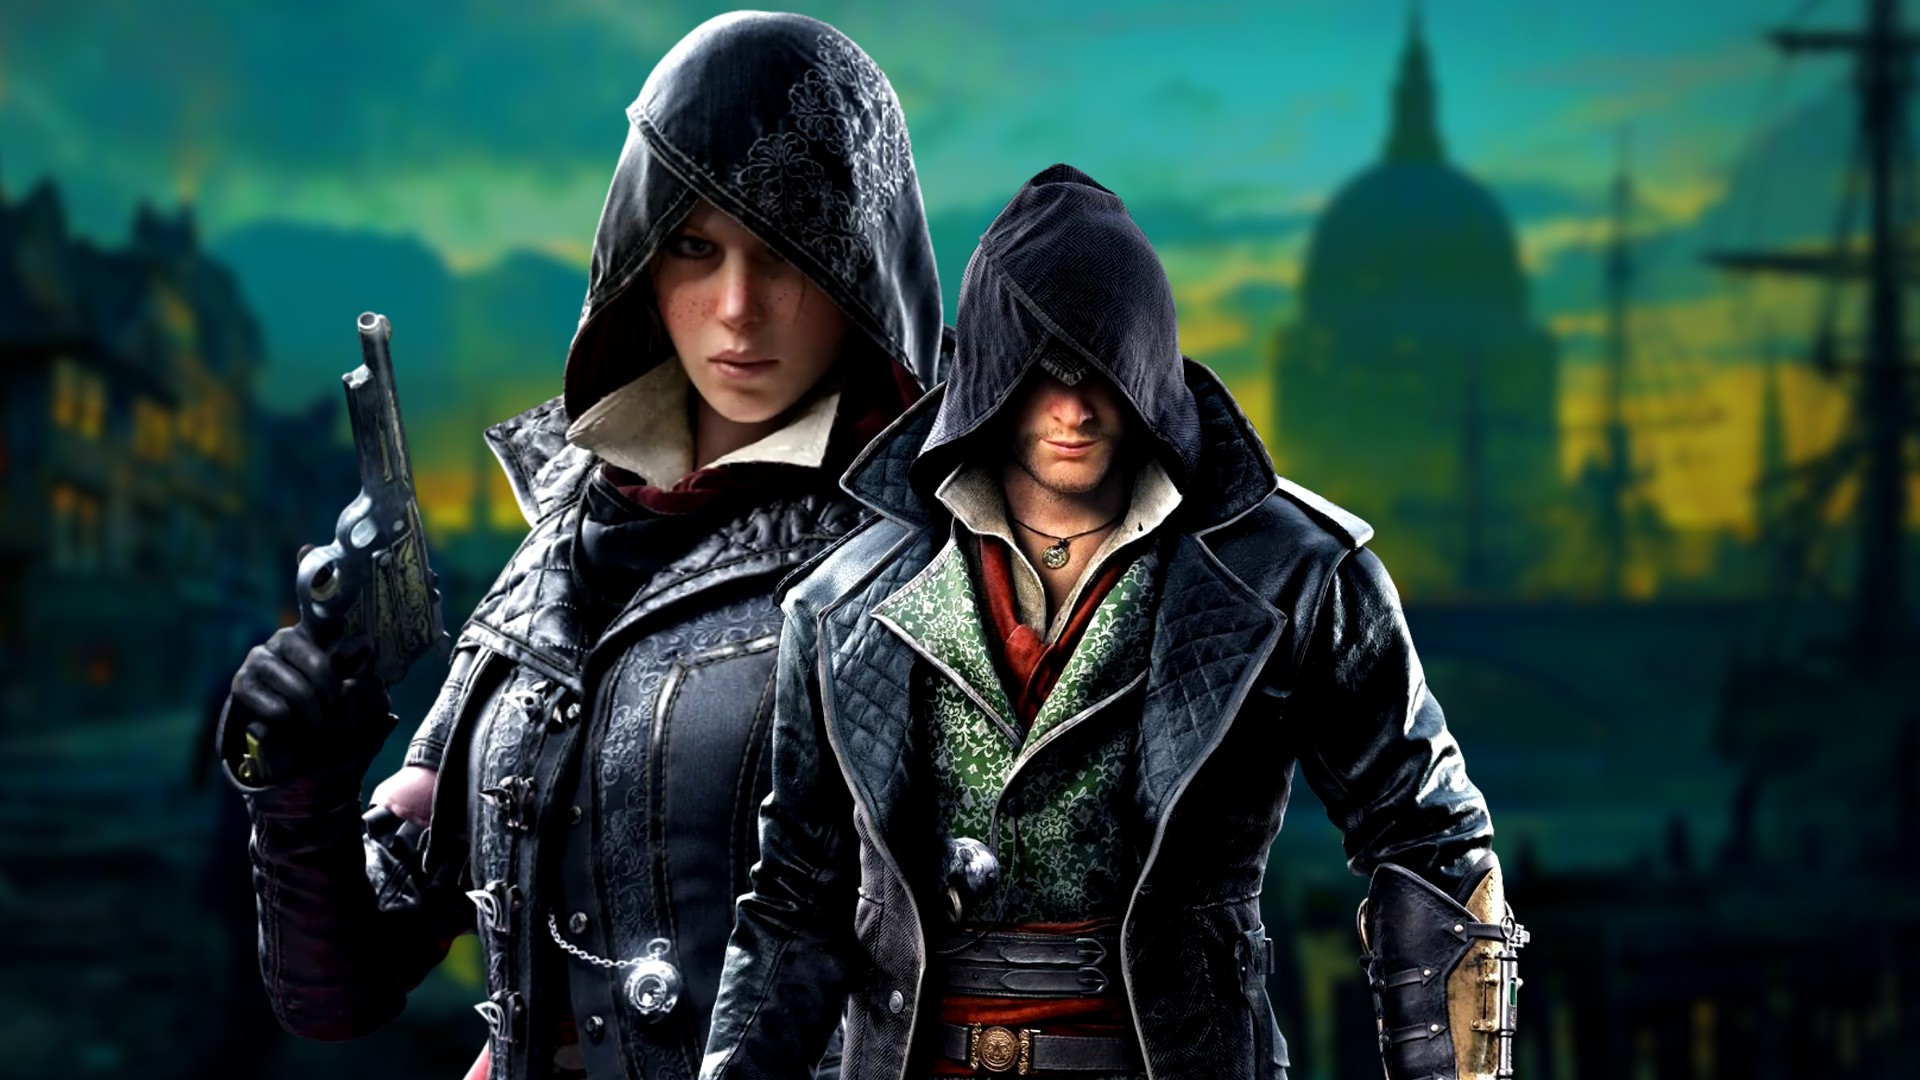 Blakwoodz on X: Assassin's Creed Syndicate is getting a PS5 Update 1.53  tomorrow. ✓No 60 FPS Update ✓Flickering Issues Solved on PS5 ✓Visual Fixes  to Textures ℹ️ 4K Update is unknown at